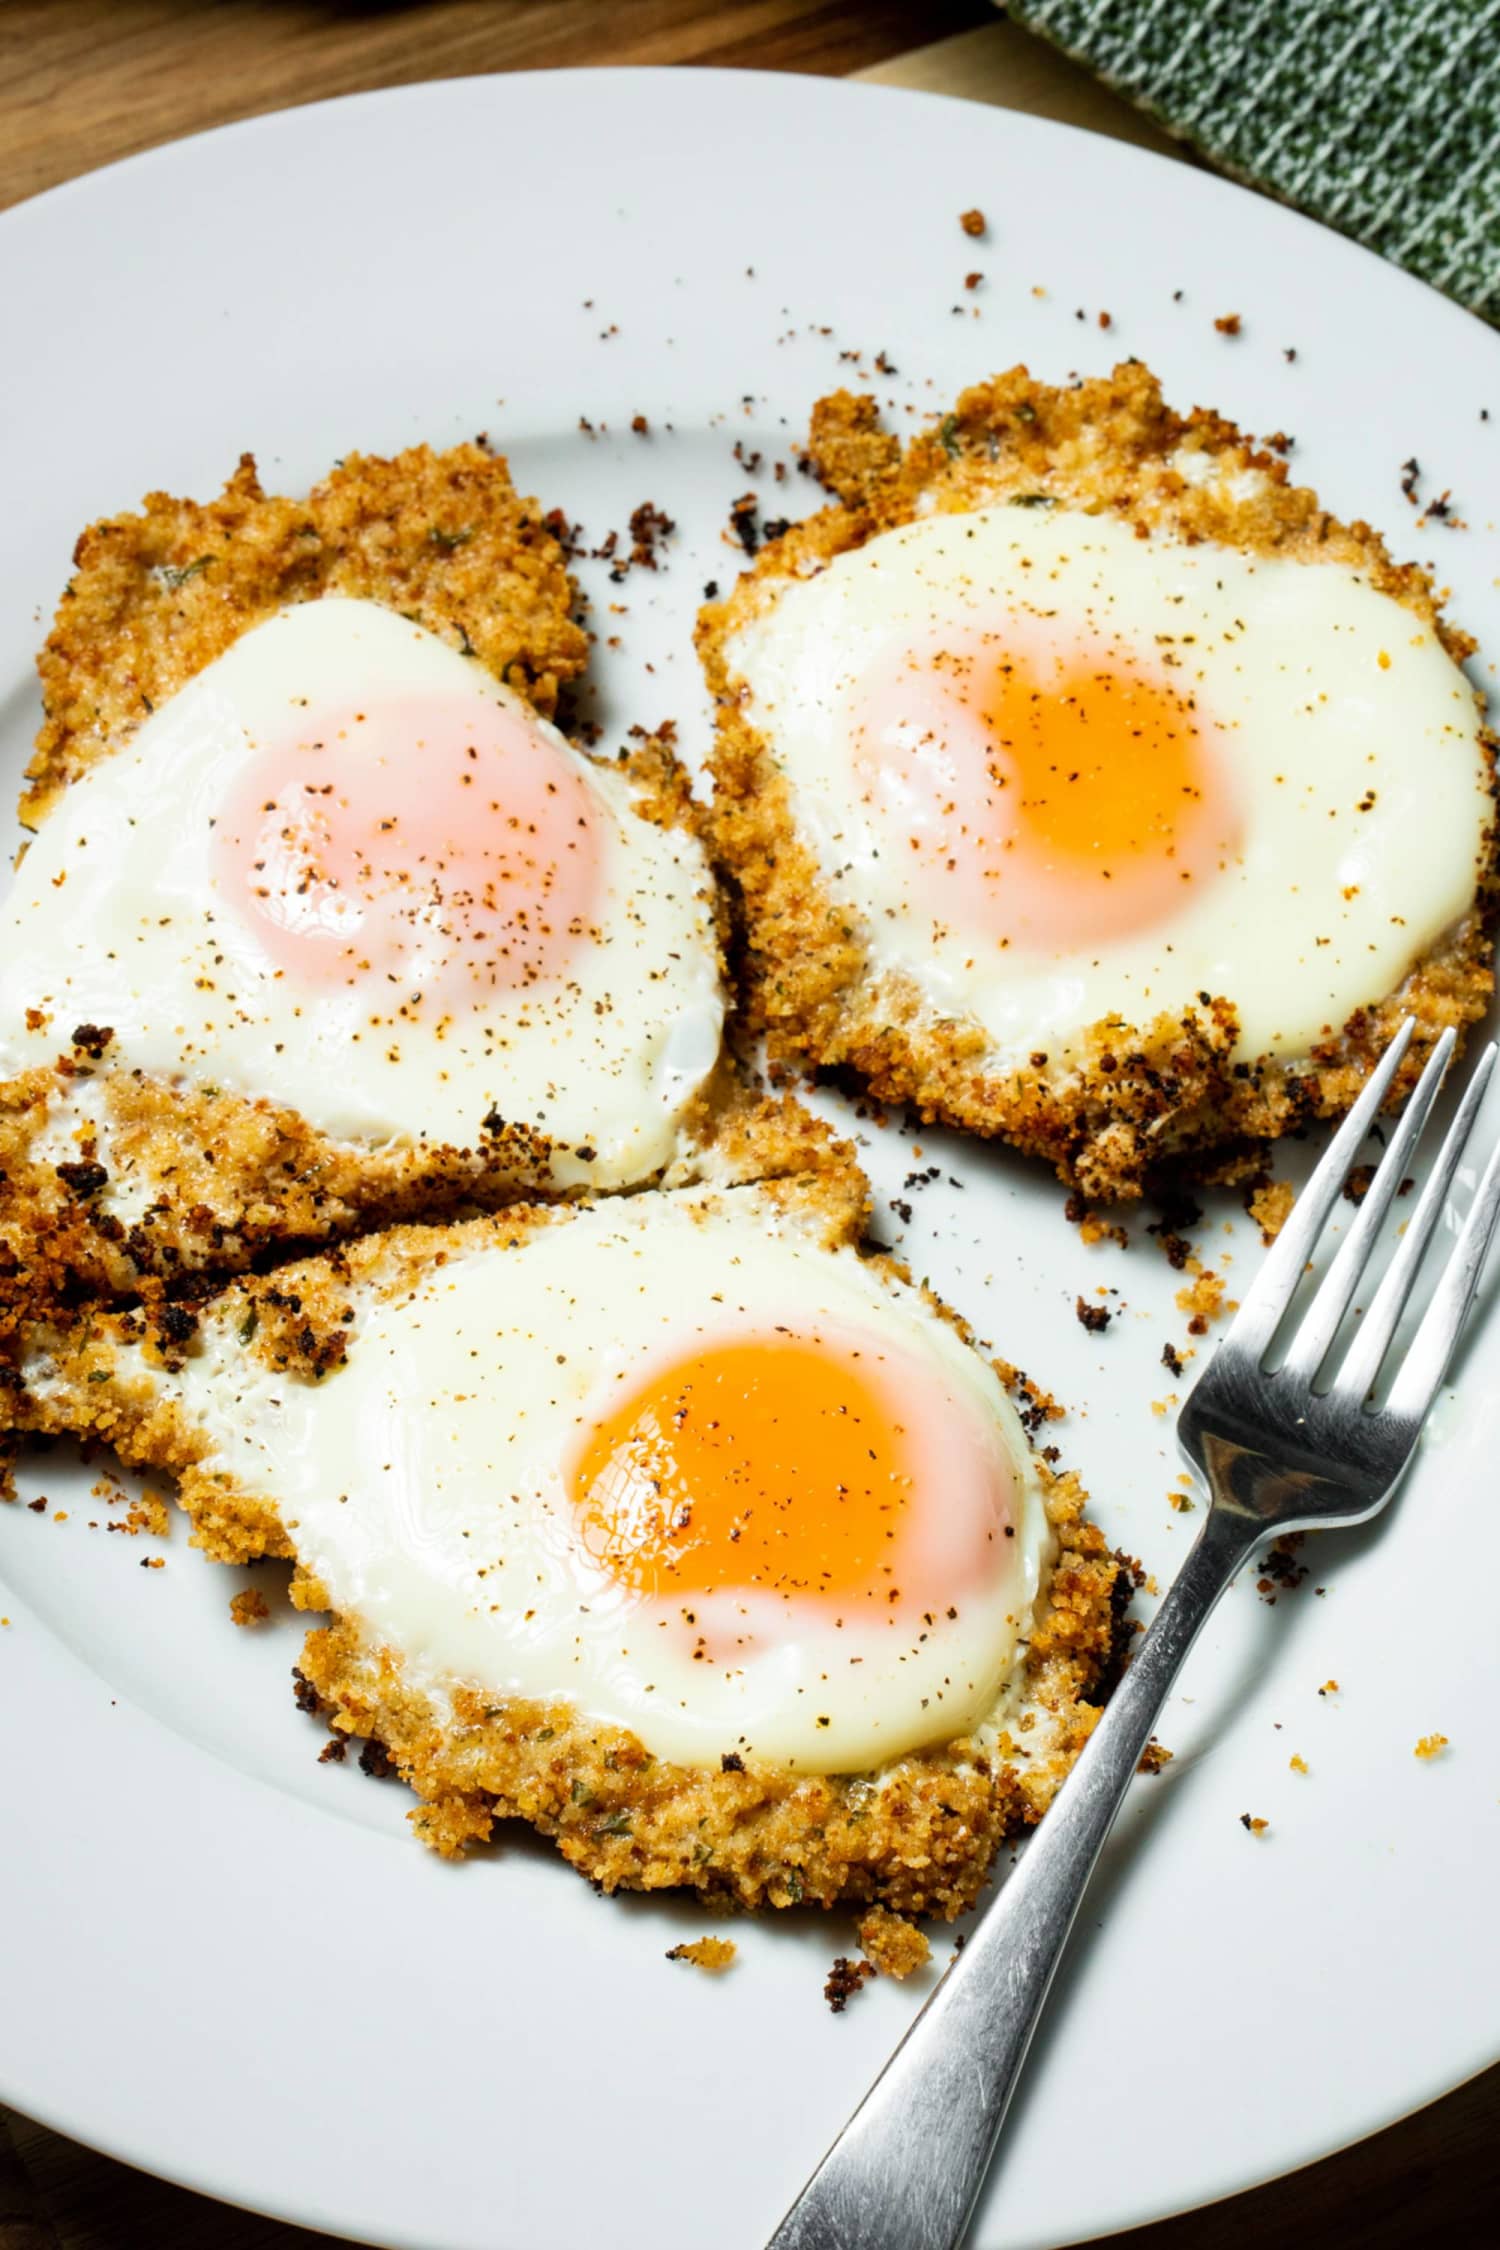 I Tried the Viral Crispy Fried Eggs and They Definitely Live Up to the Hype